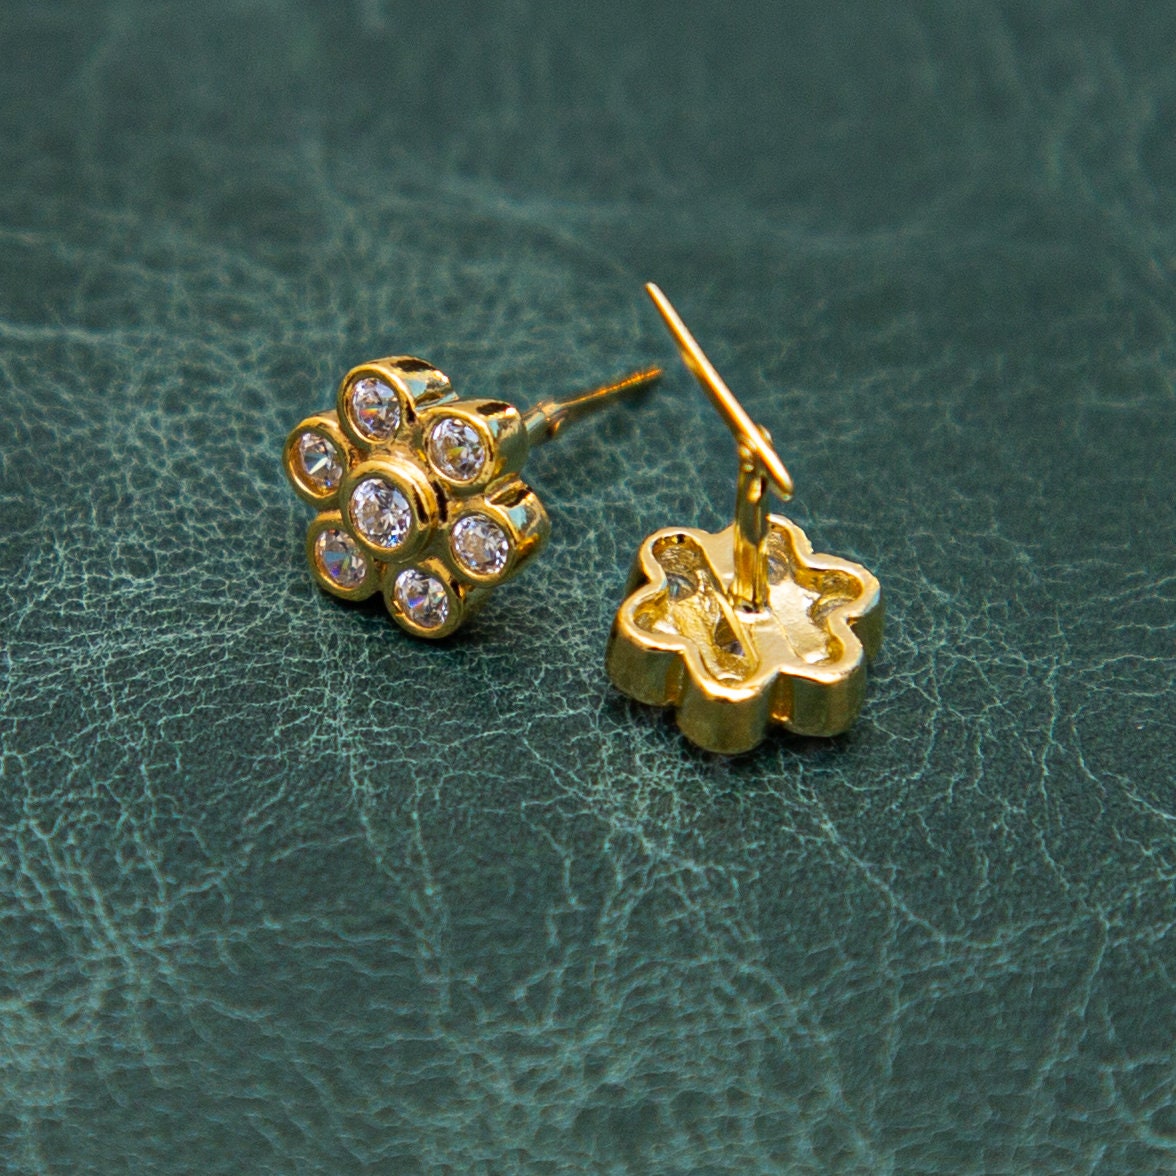 Andralok 9ct Yellow Gold Pearl Flower 3mm Stud Earrings